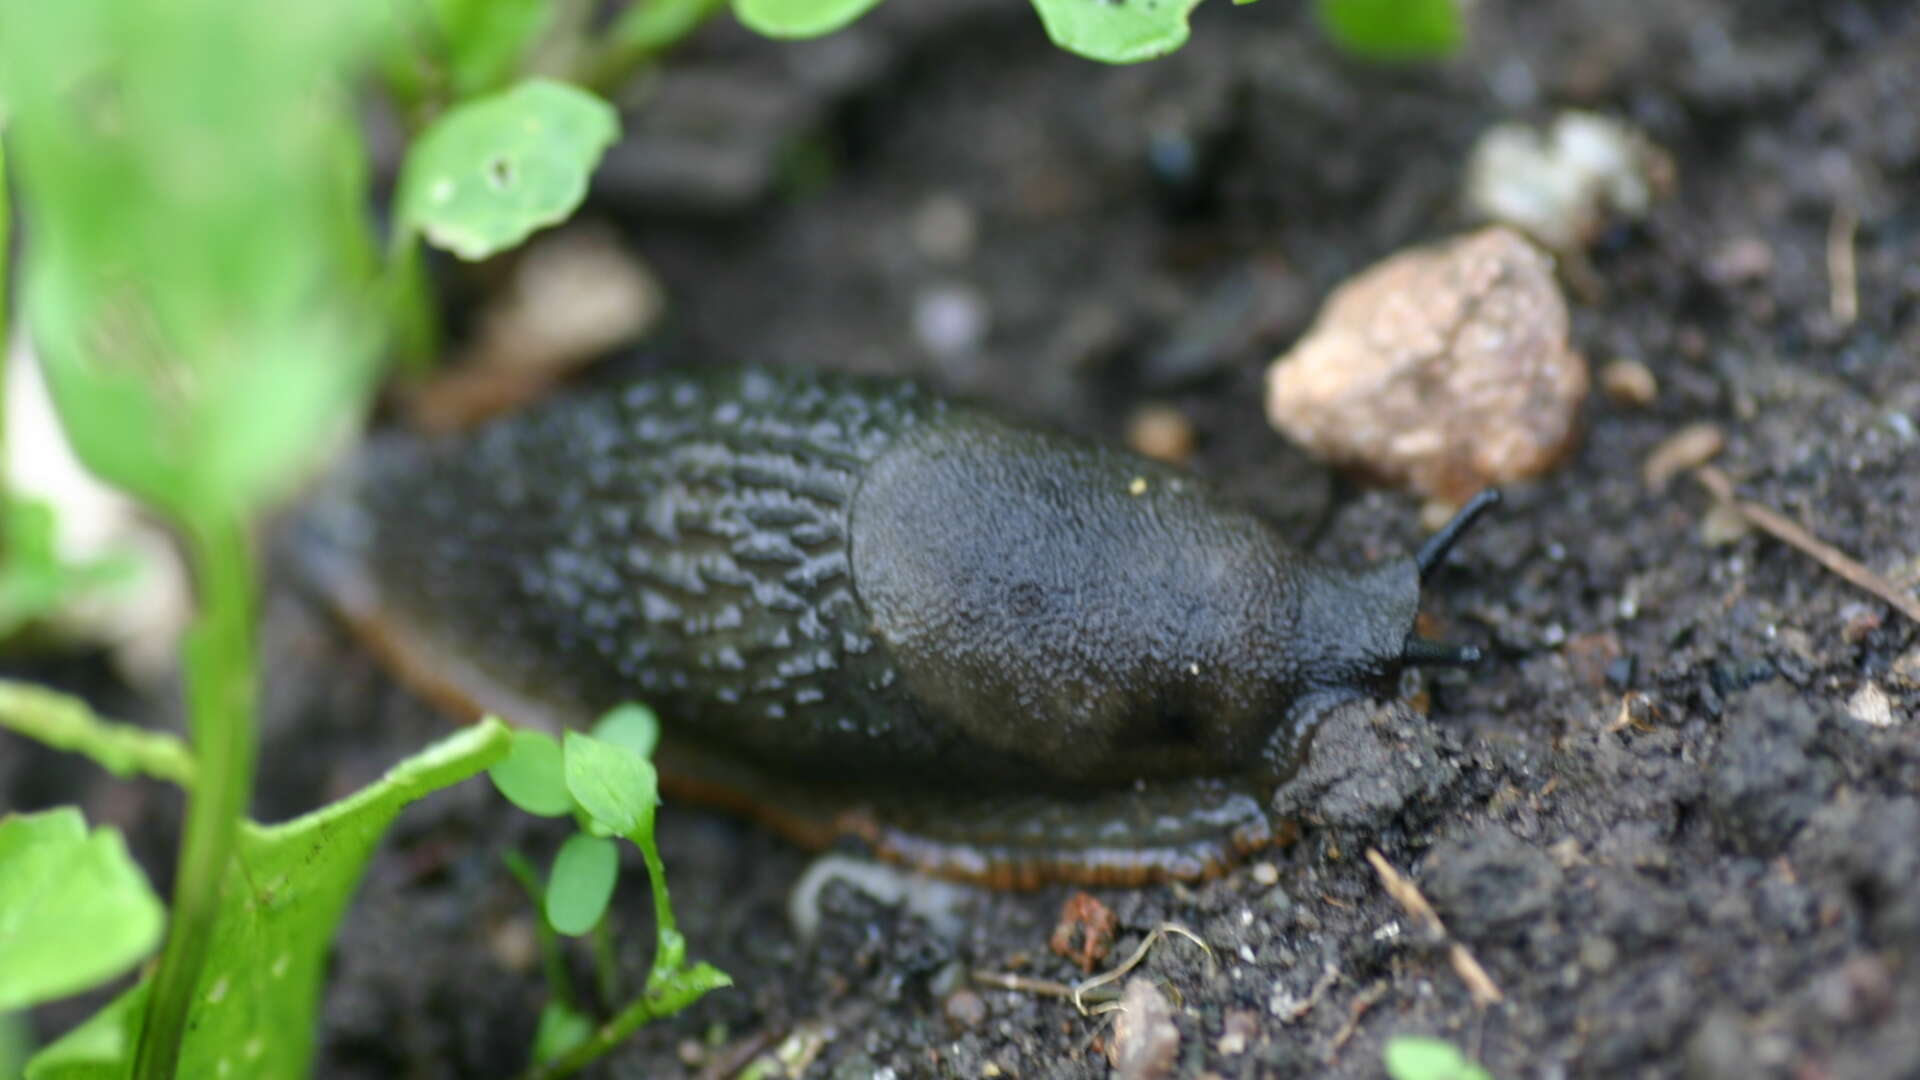 A slug in soil surrounded by leaves